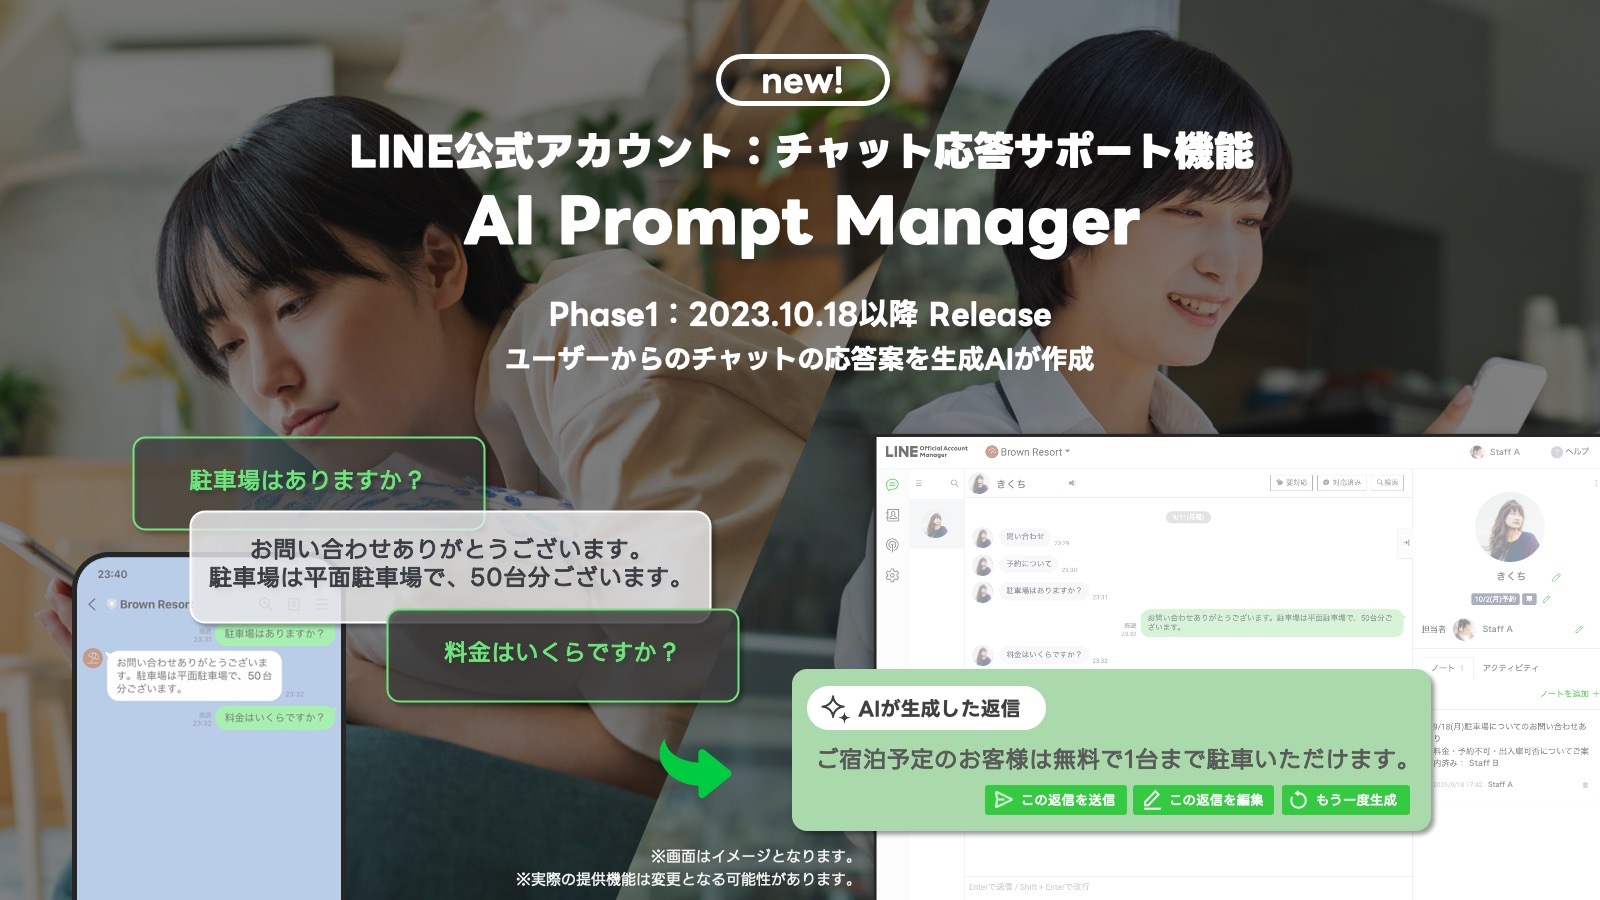 AI Prompt Manager